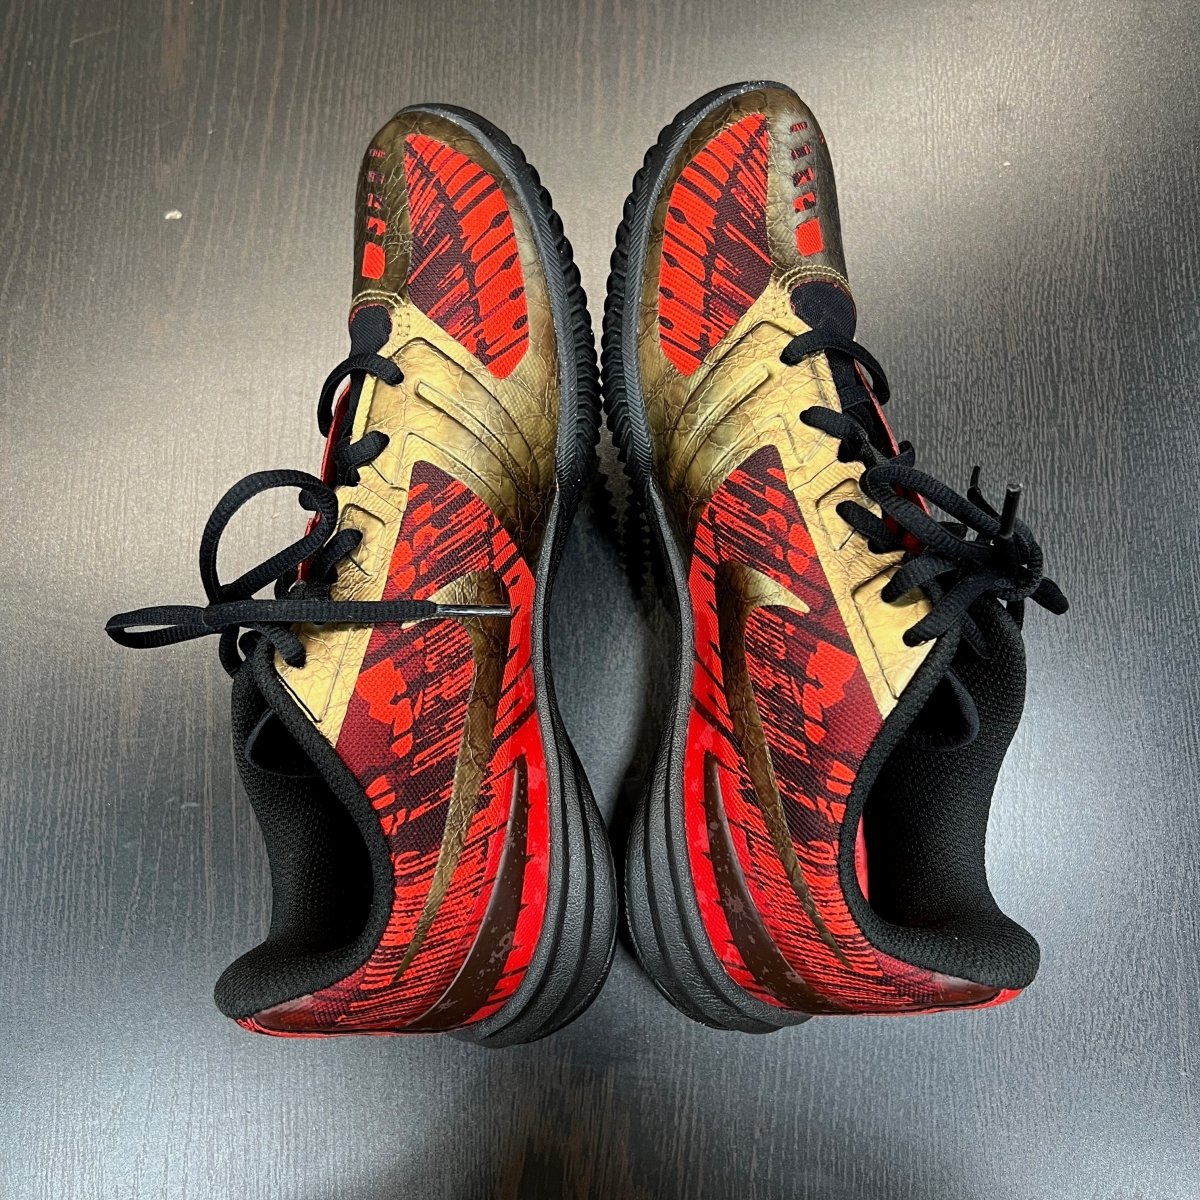 Kobe Mentality 'Black Gold Red' - Gently Enjoyed (Used) - Men 7.5 - No Box  - Jawns On Fire